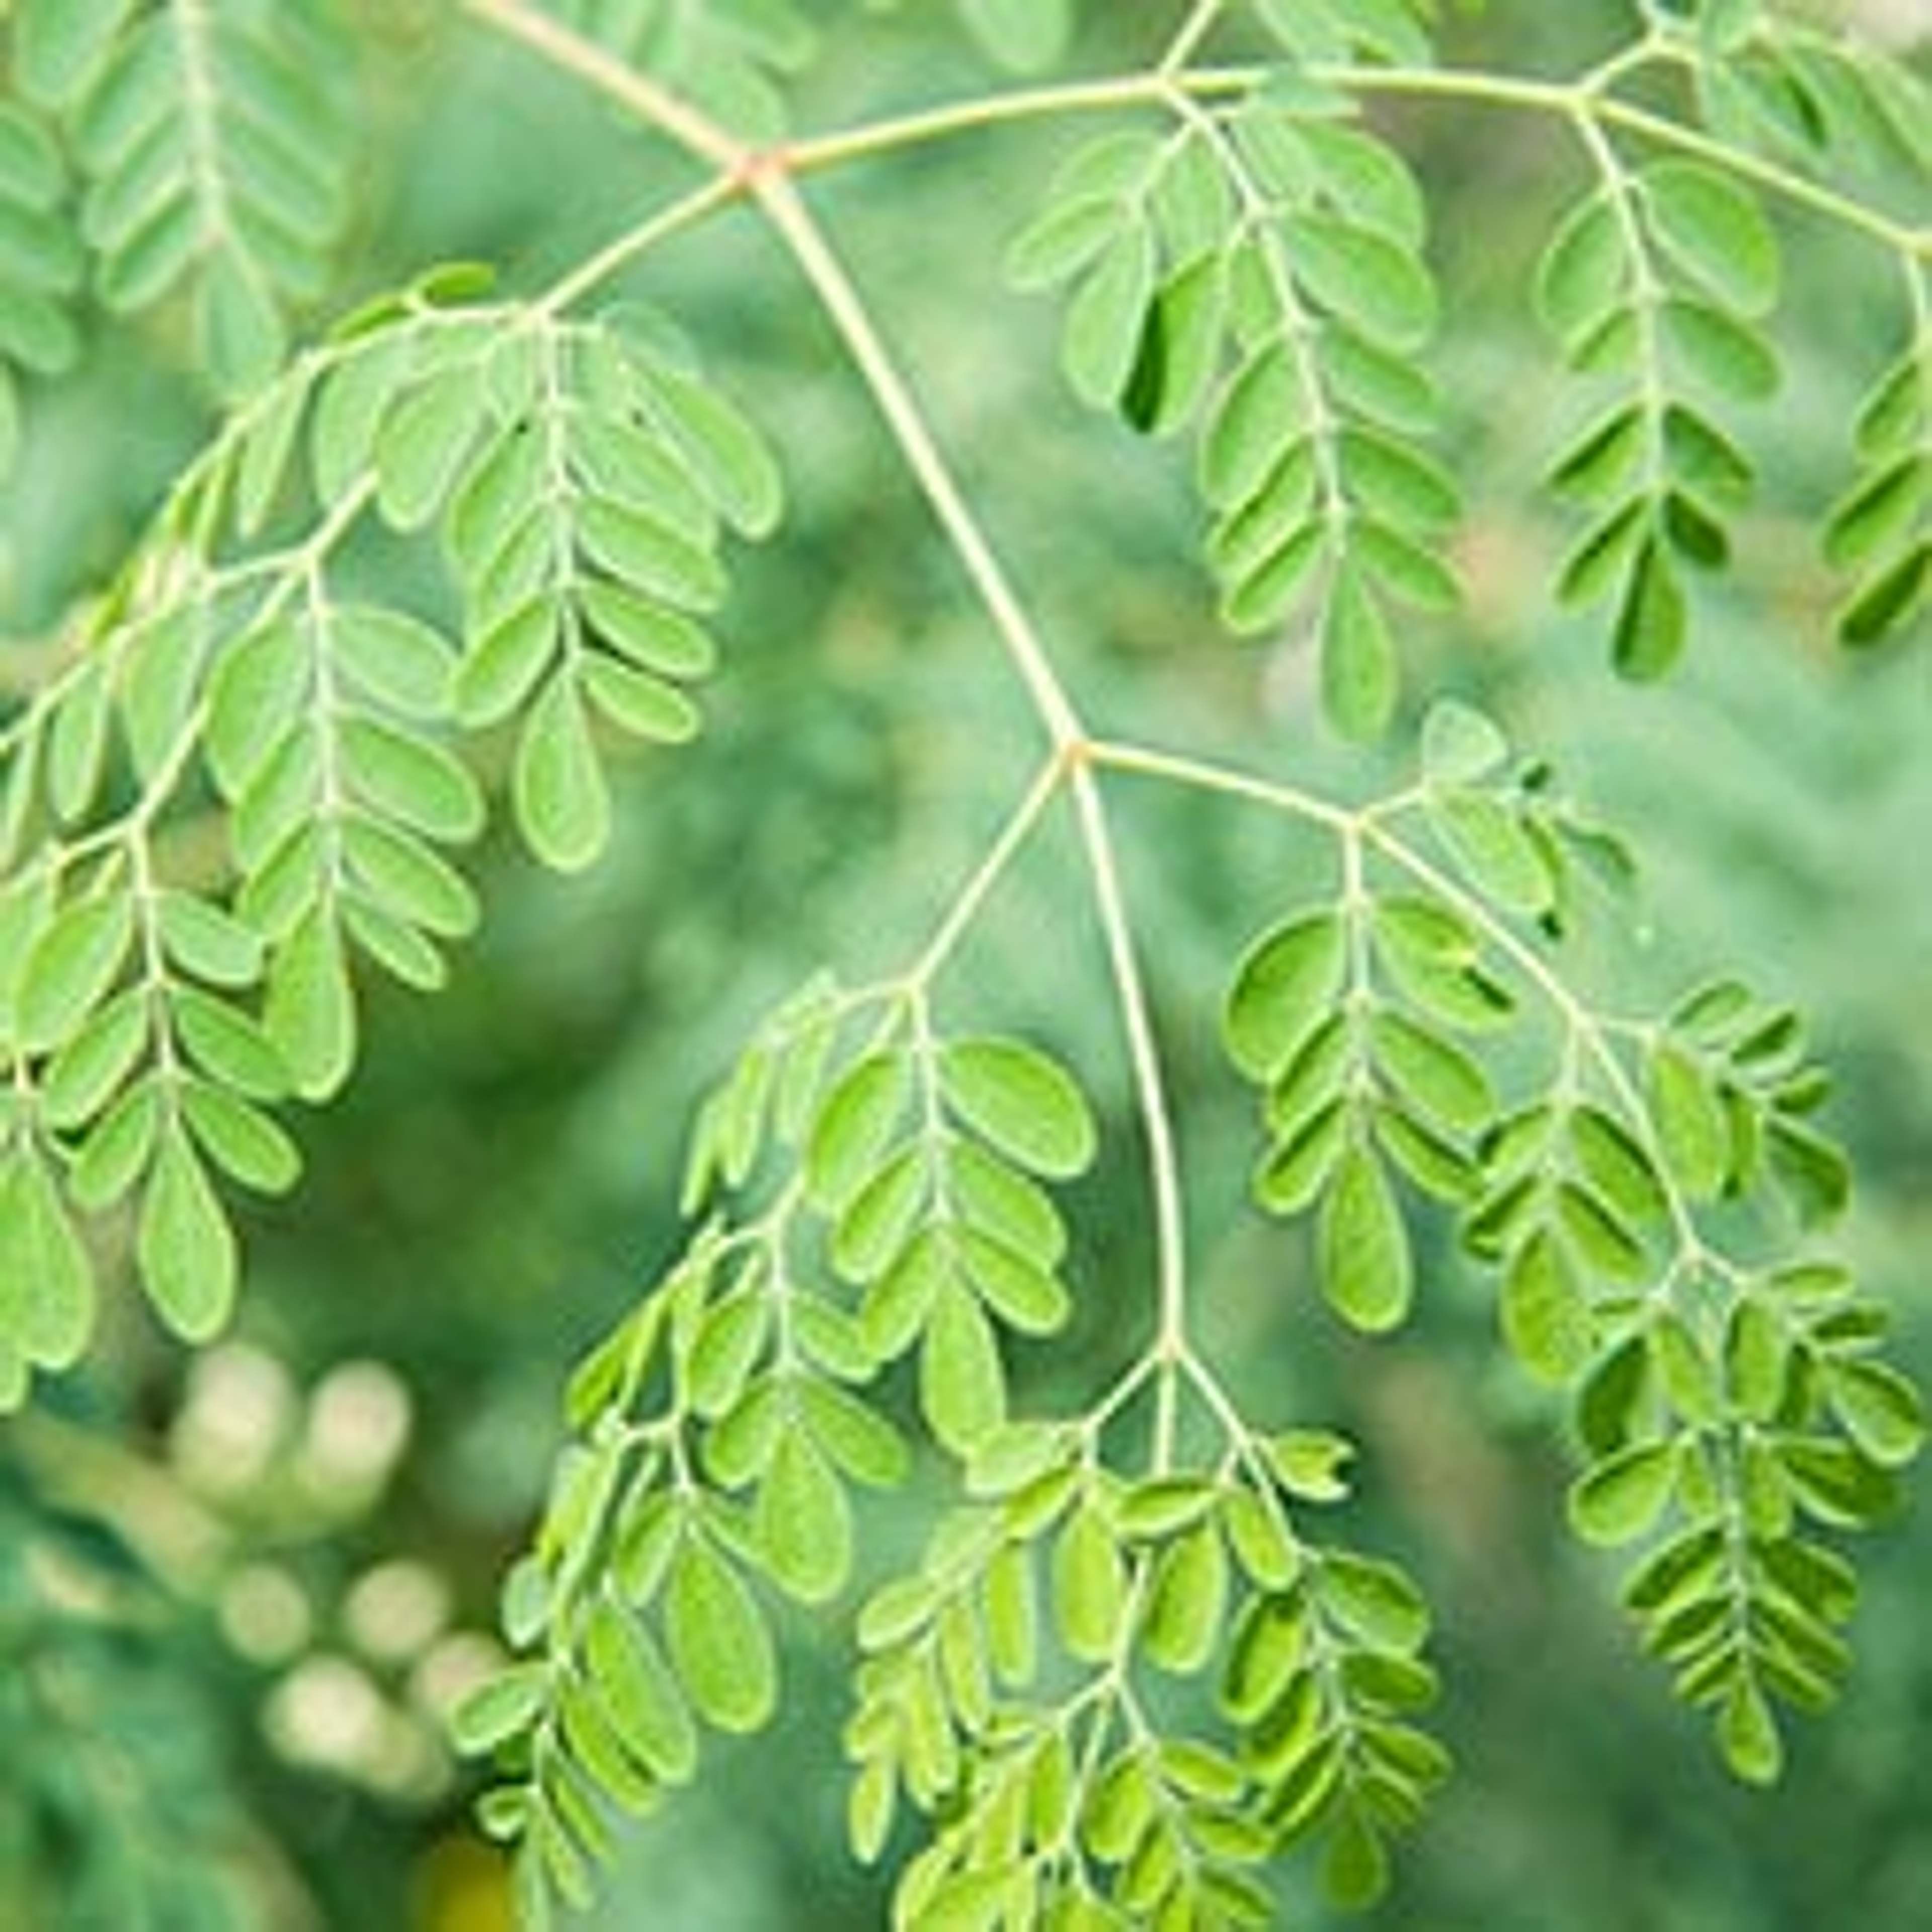 Moringa is a remarkable, versatile plant that is relevant to a variety of health issues.